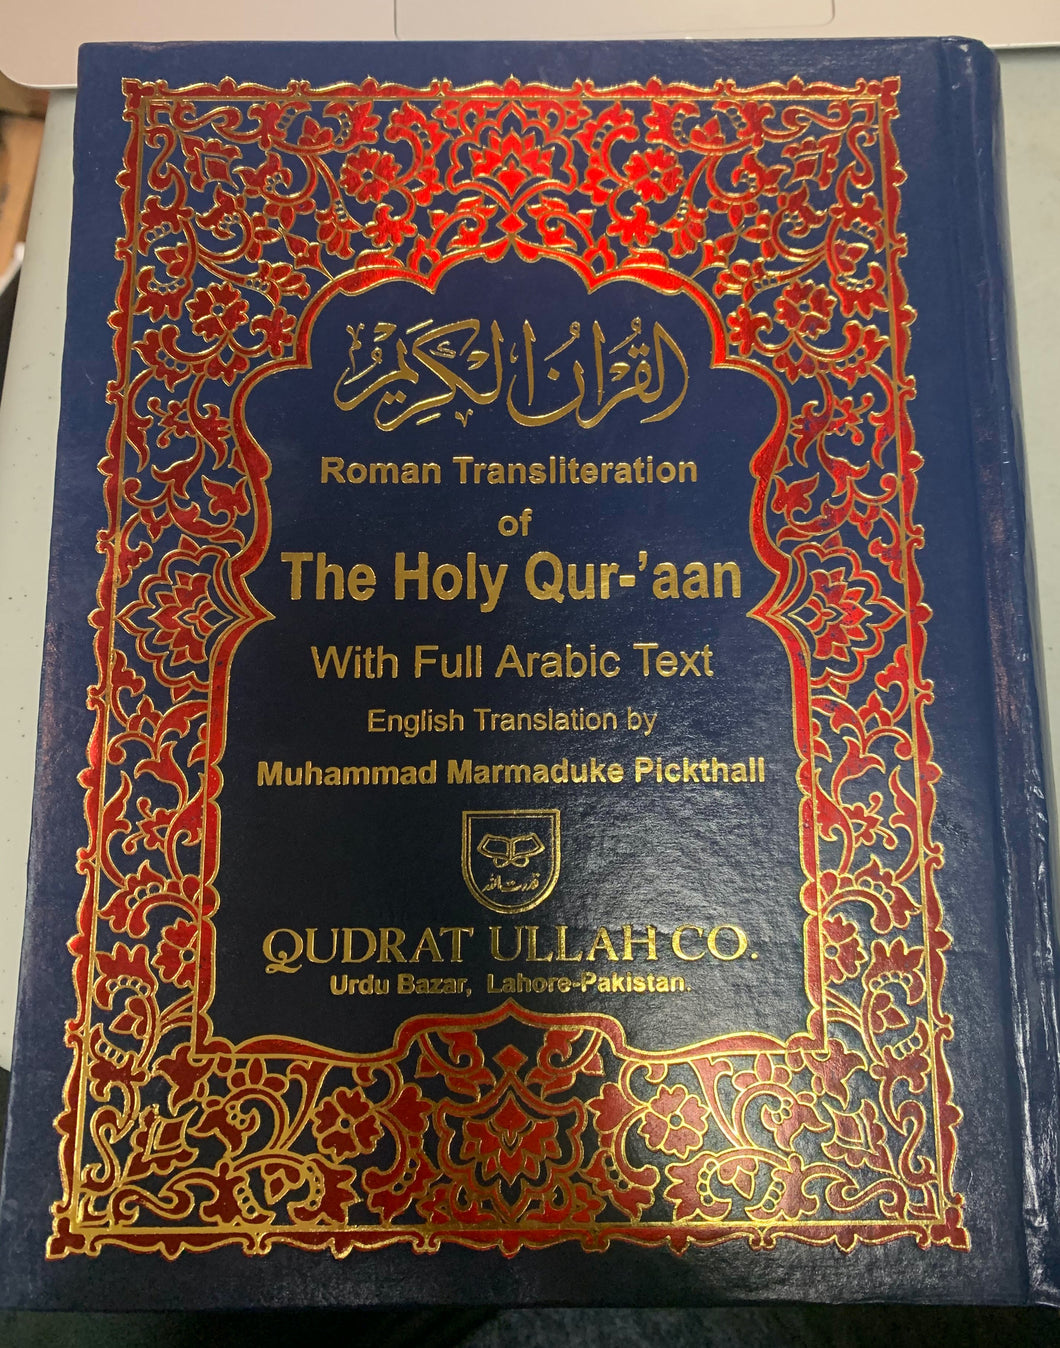 Roman transliteration of Holy Quran with full Arabic text